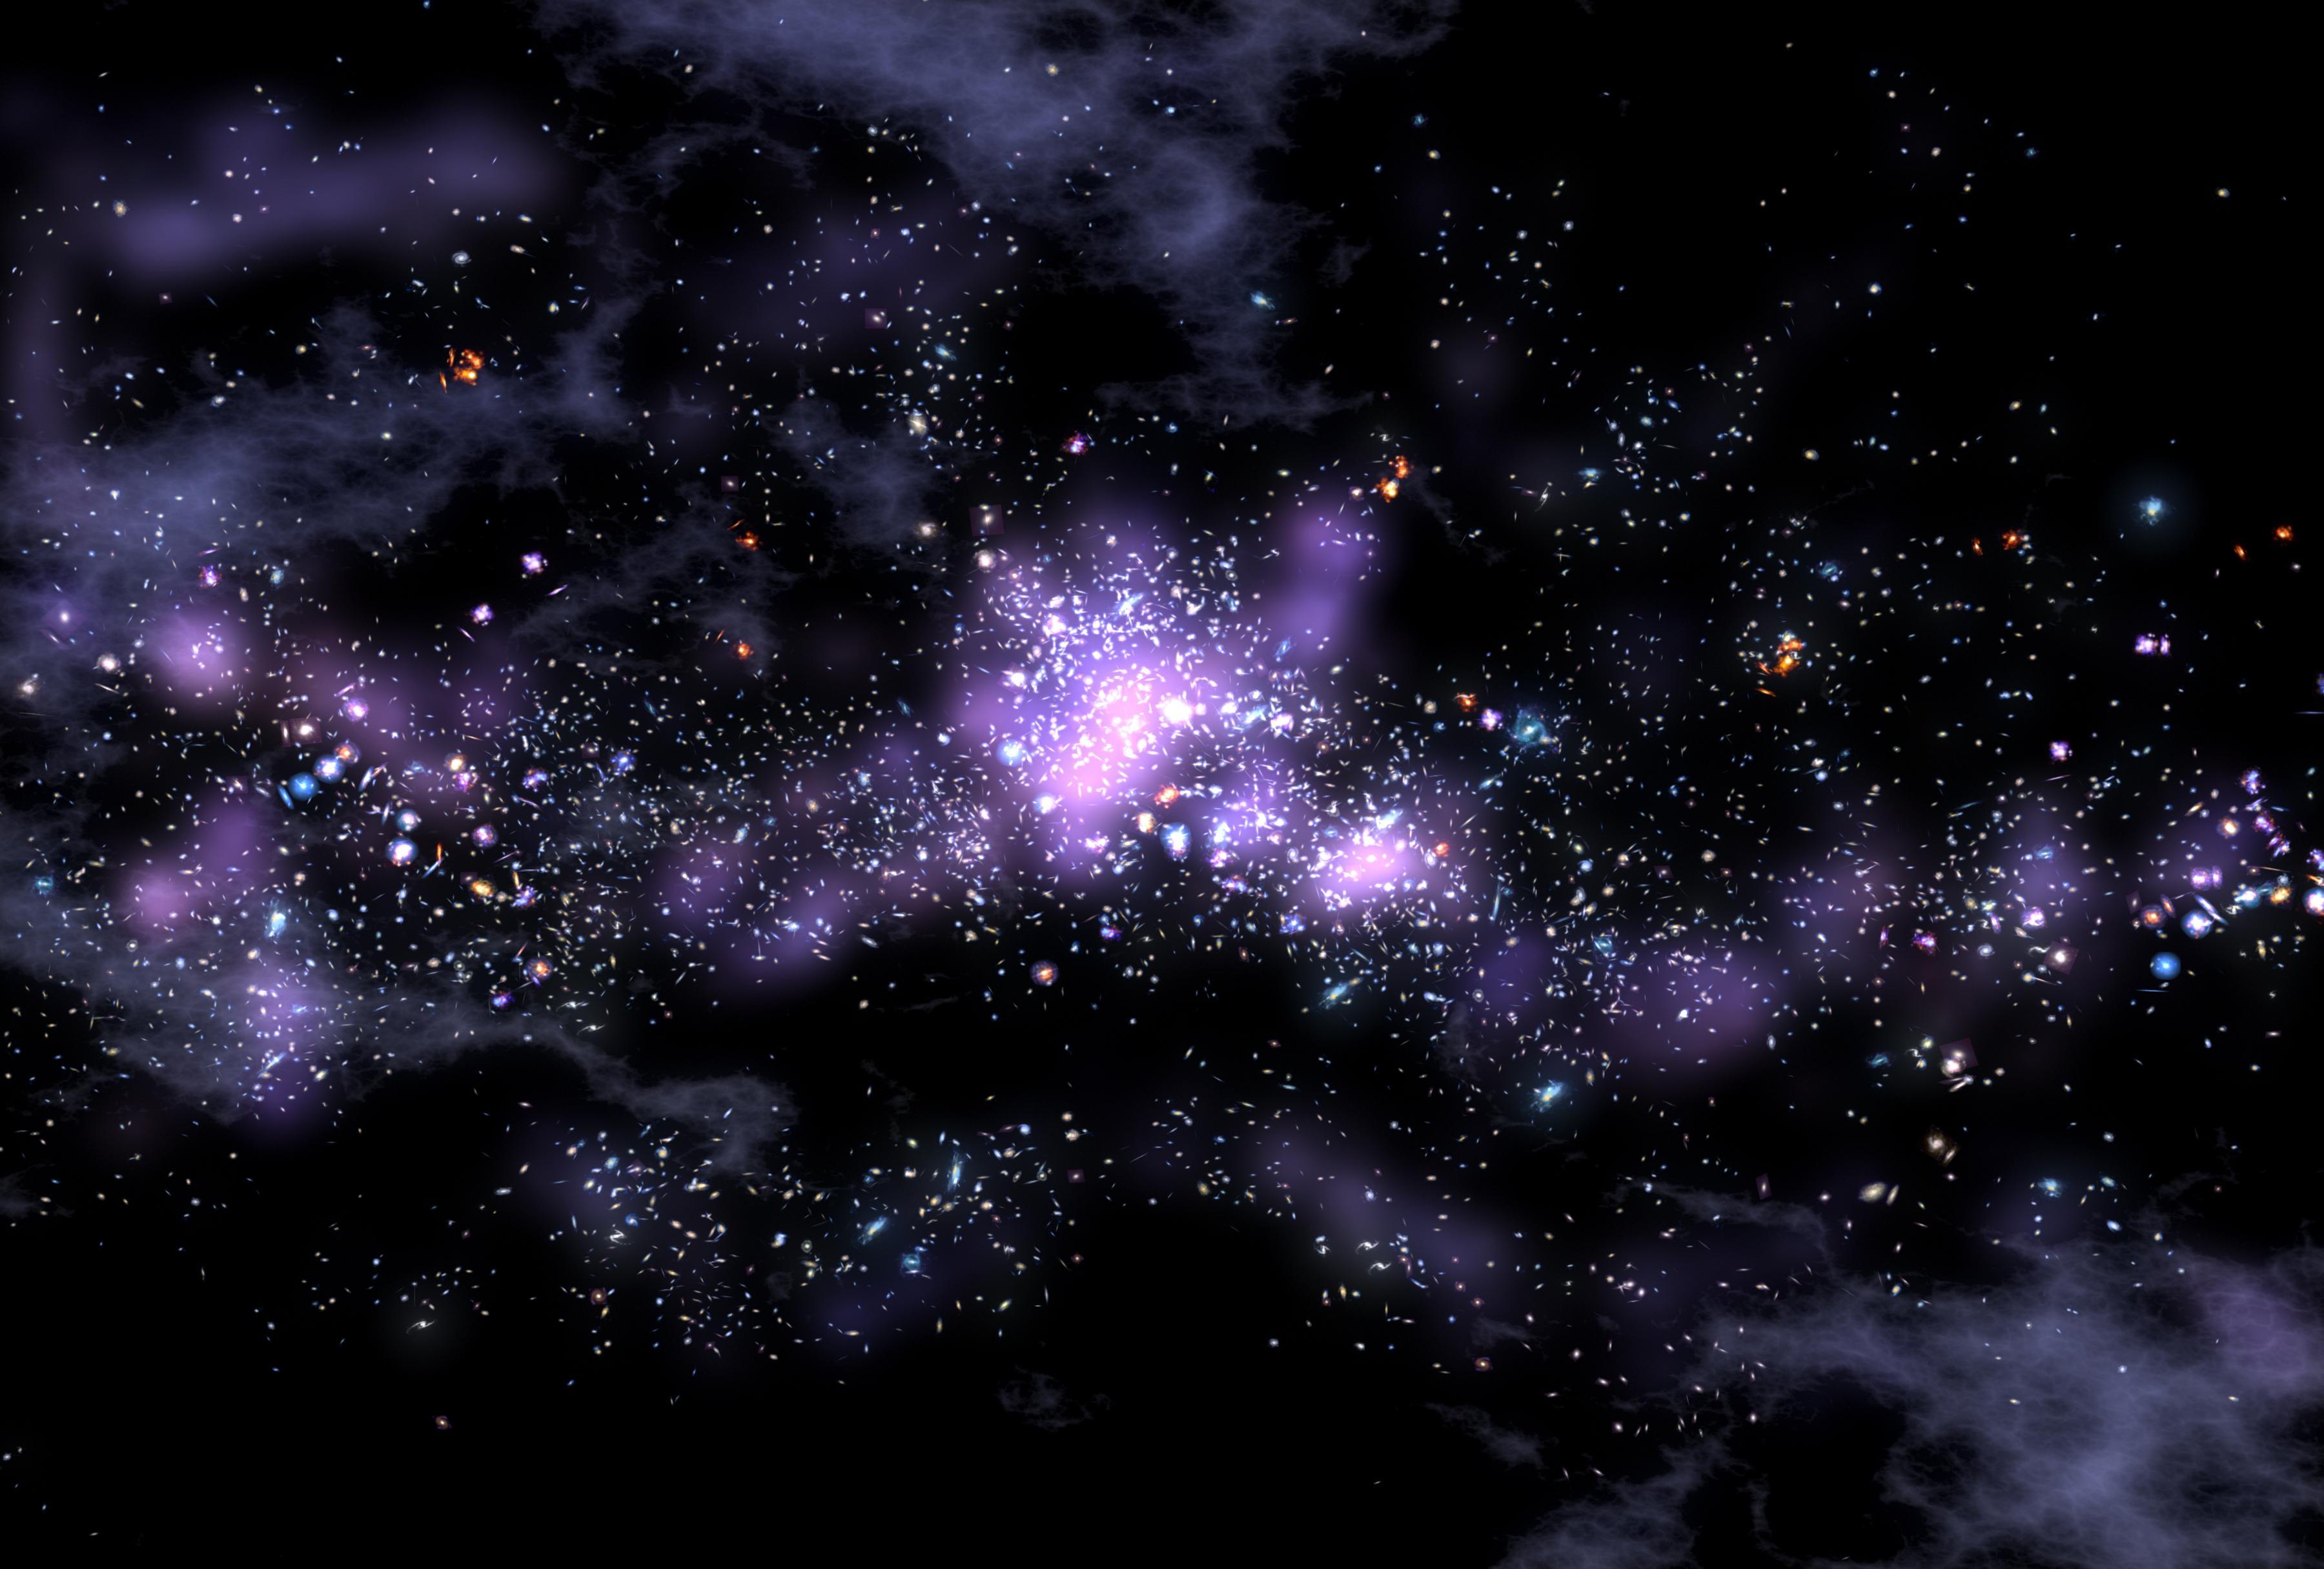 NASA Story: Giant Galaxy String Defies Models of how